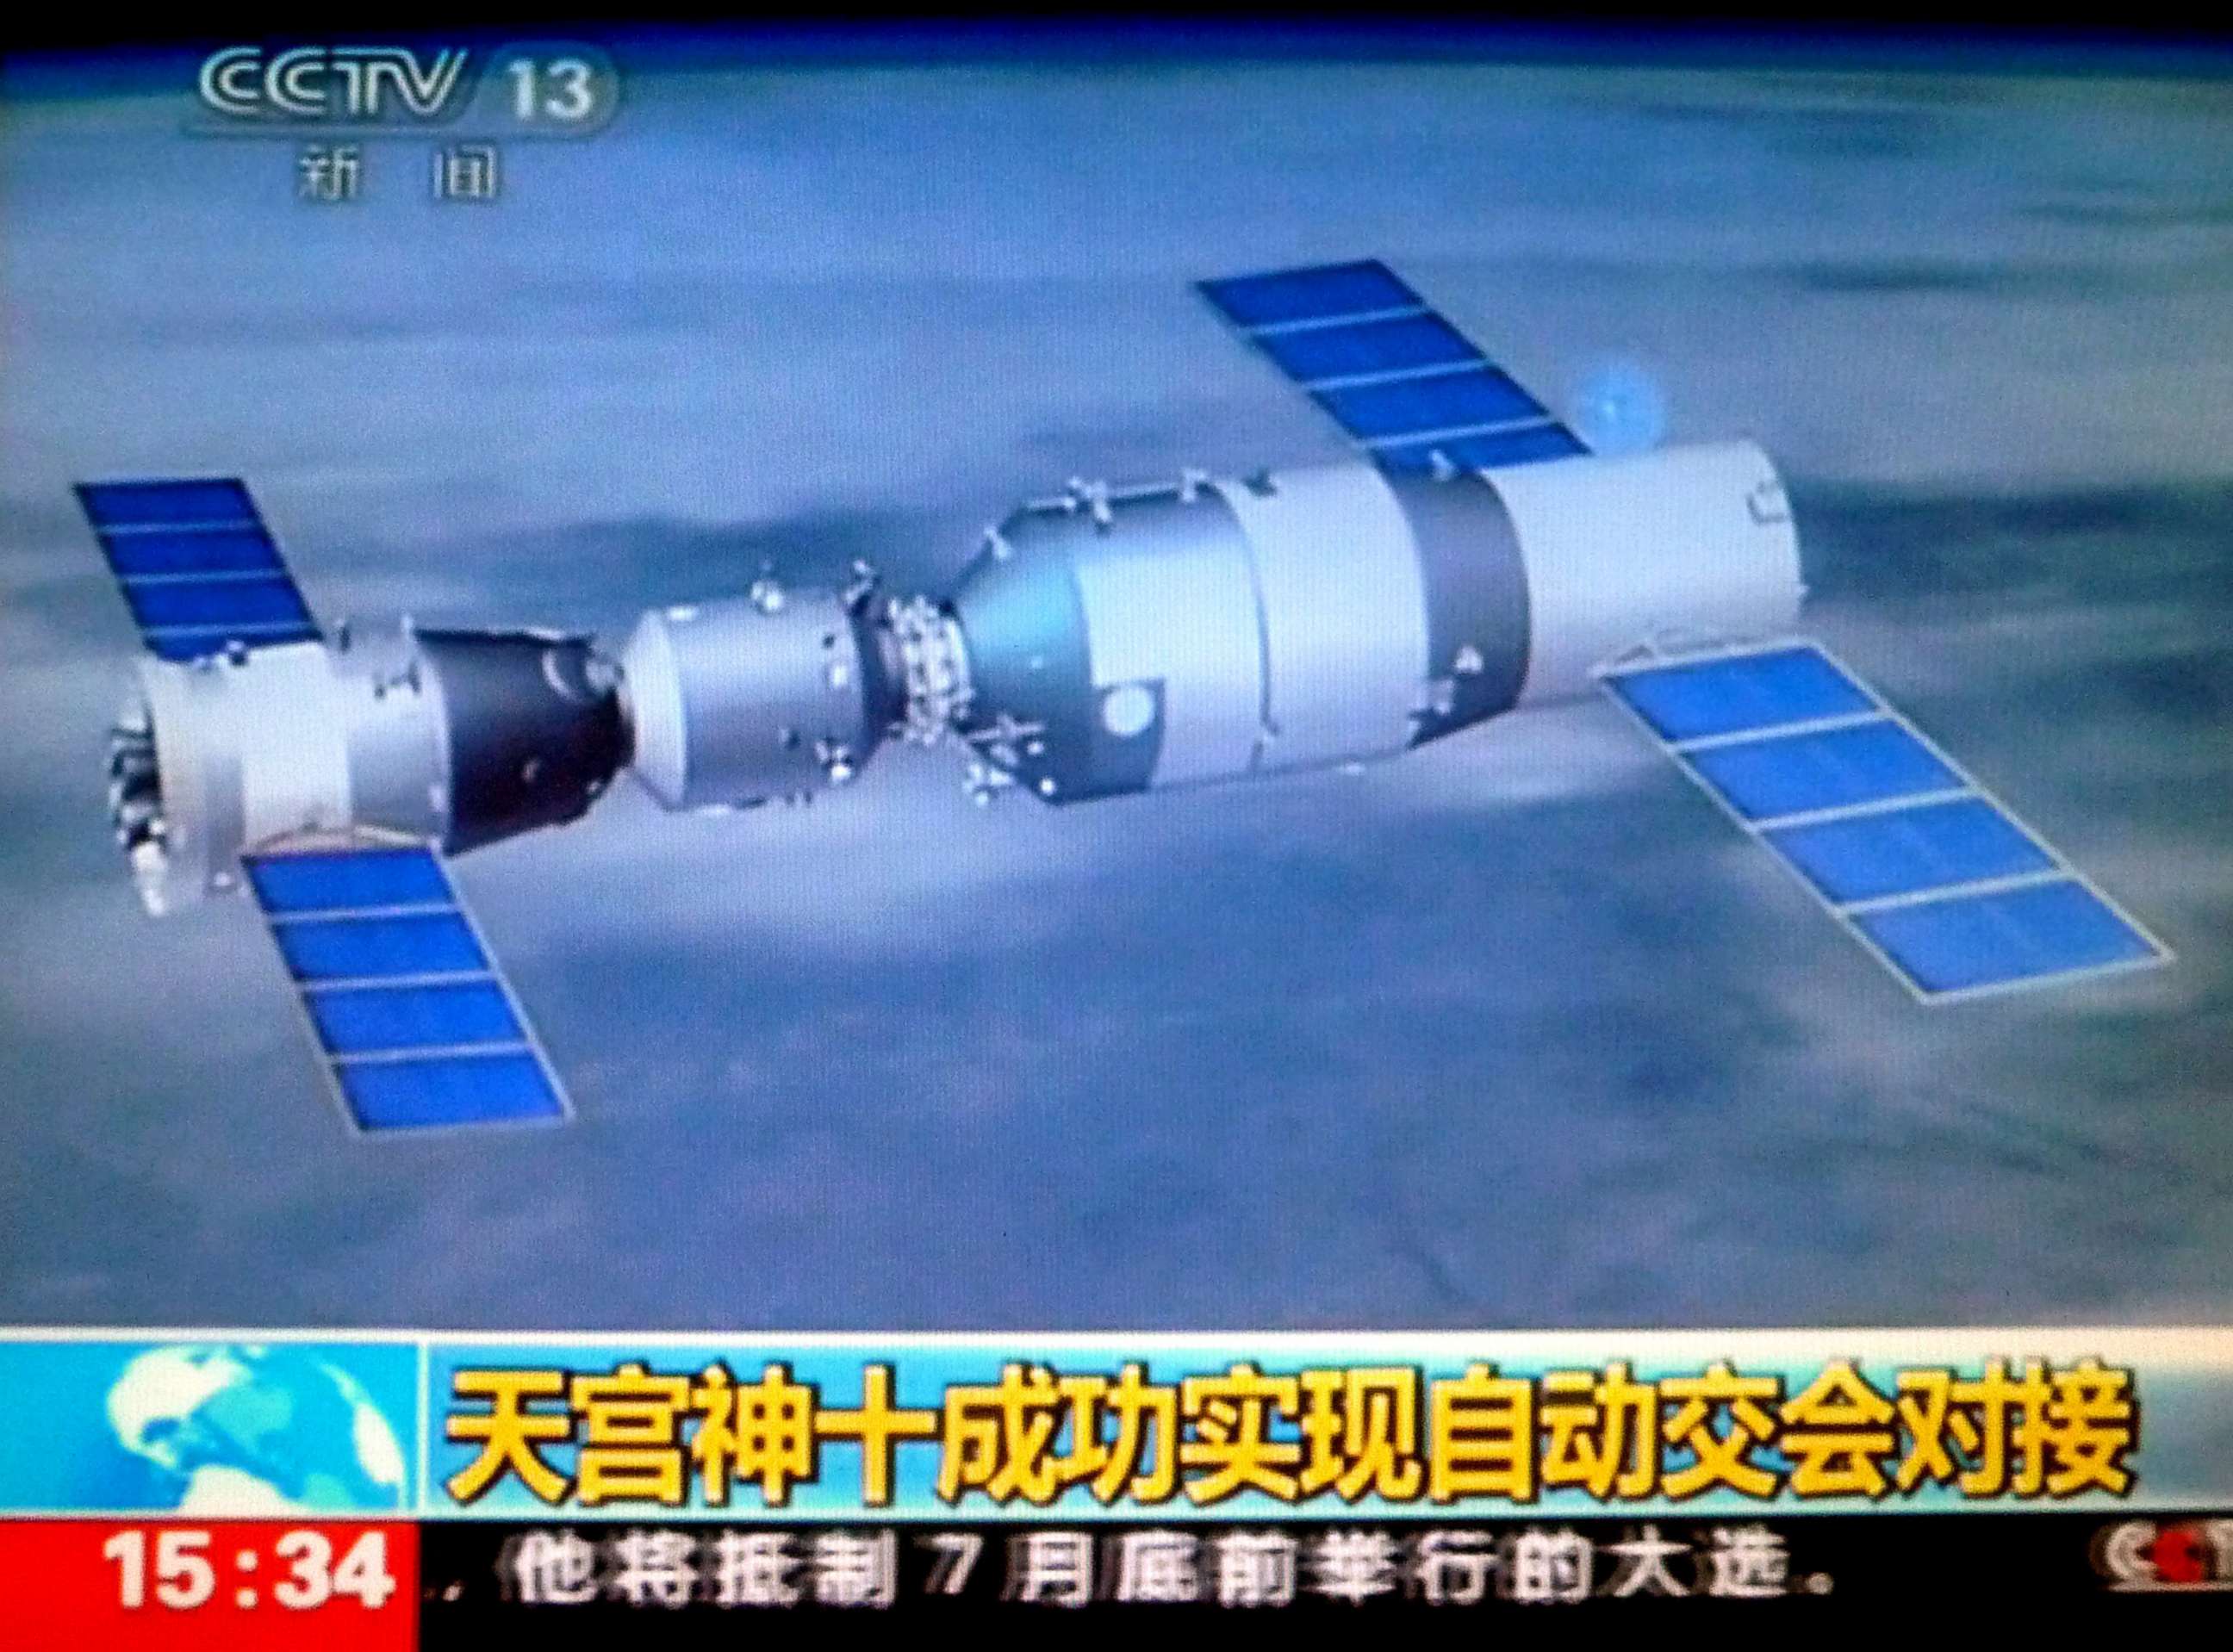 PHOTO: China's latest manned space capsule docked with the space lab, Tiangong-1 is seen in space in this June 13, 2013 TV grab.